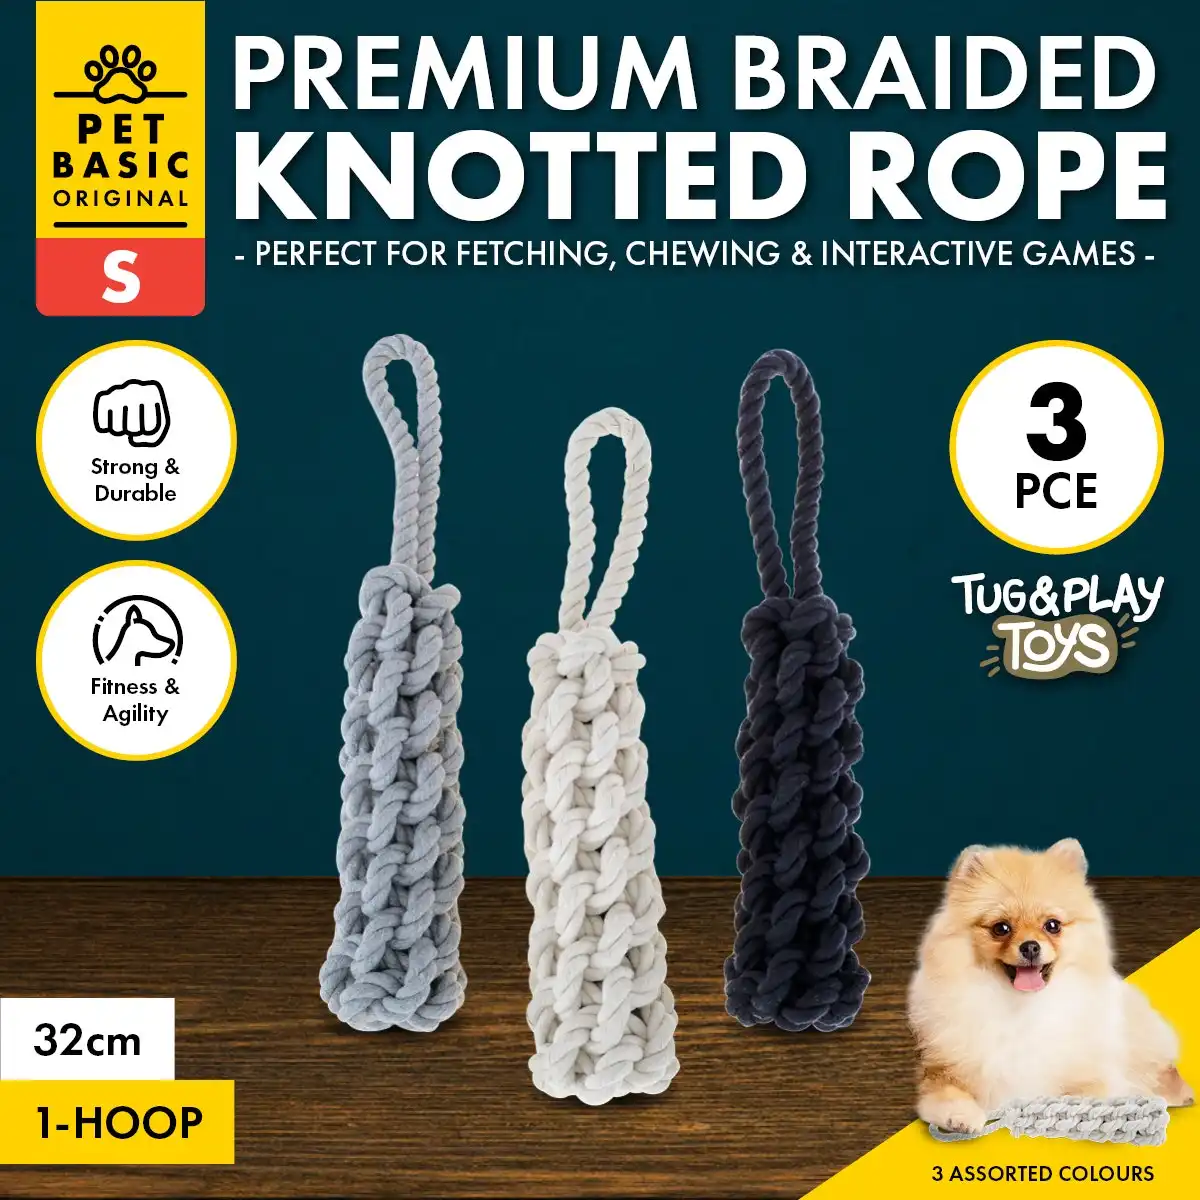 Pet Basic® 3PCE Premium Braided Knotted Rope Small Natural Fibres 32cm